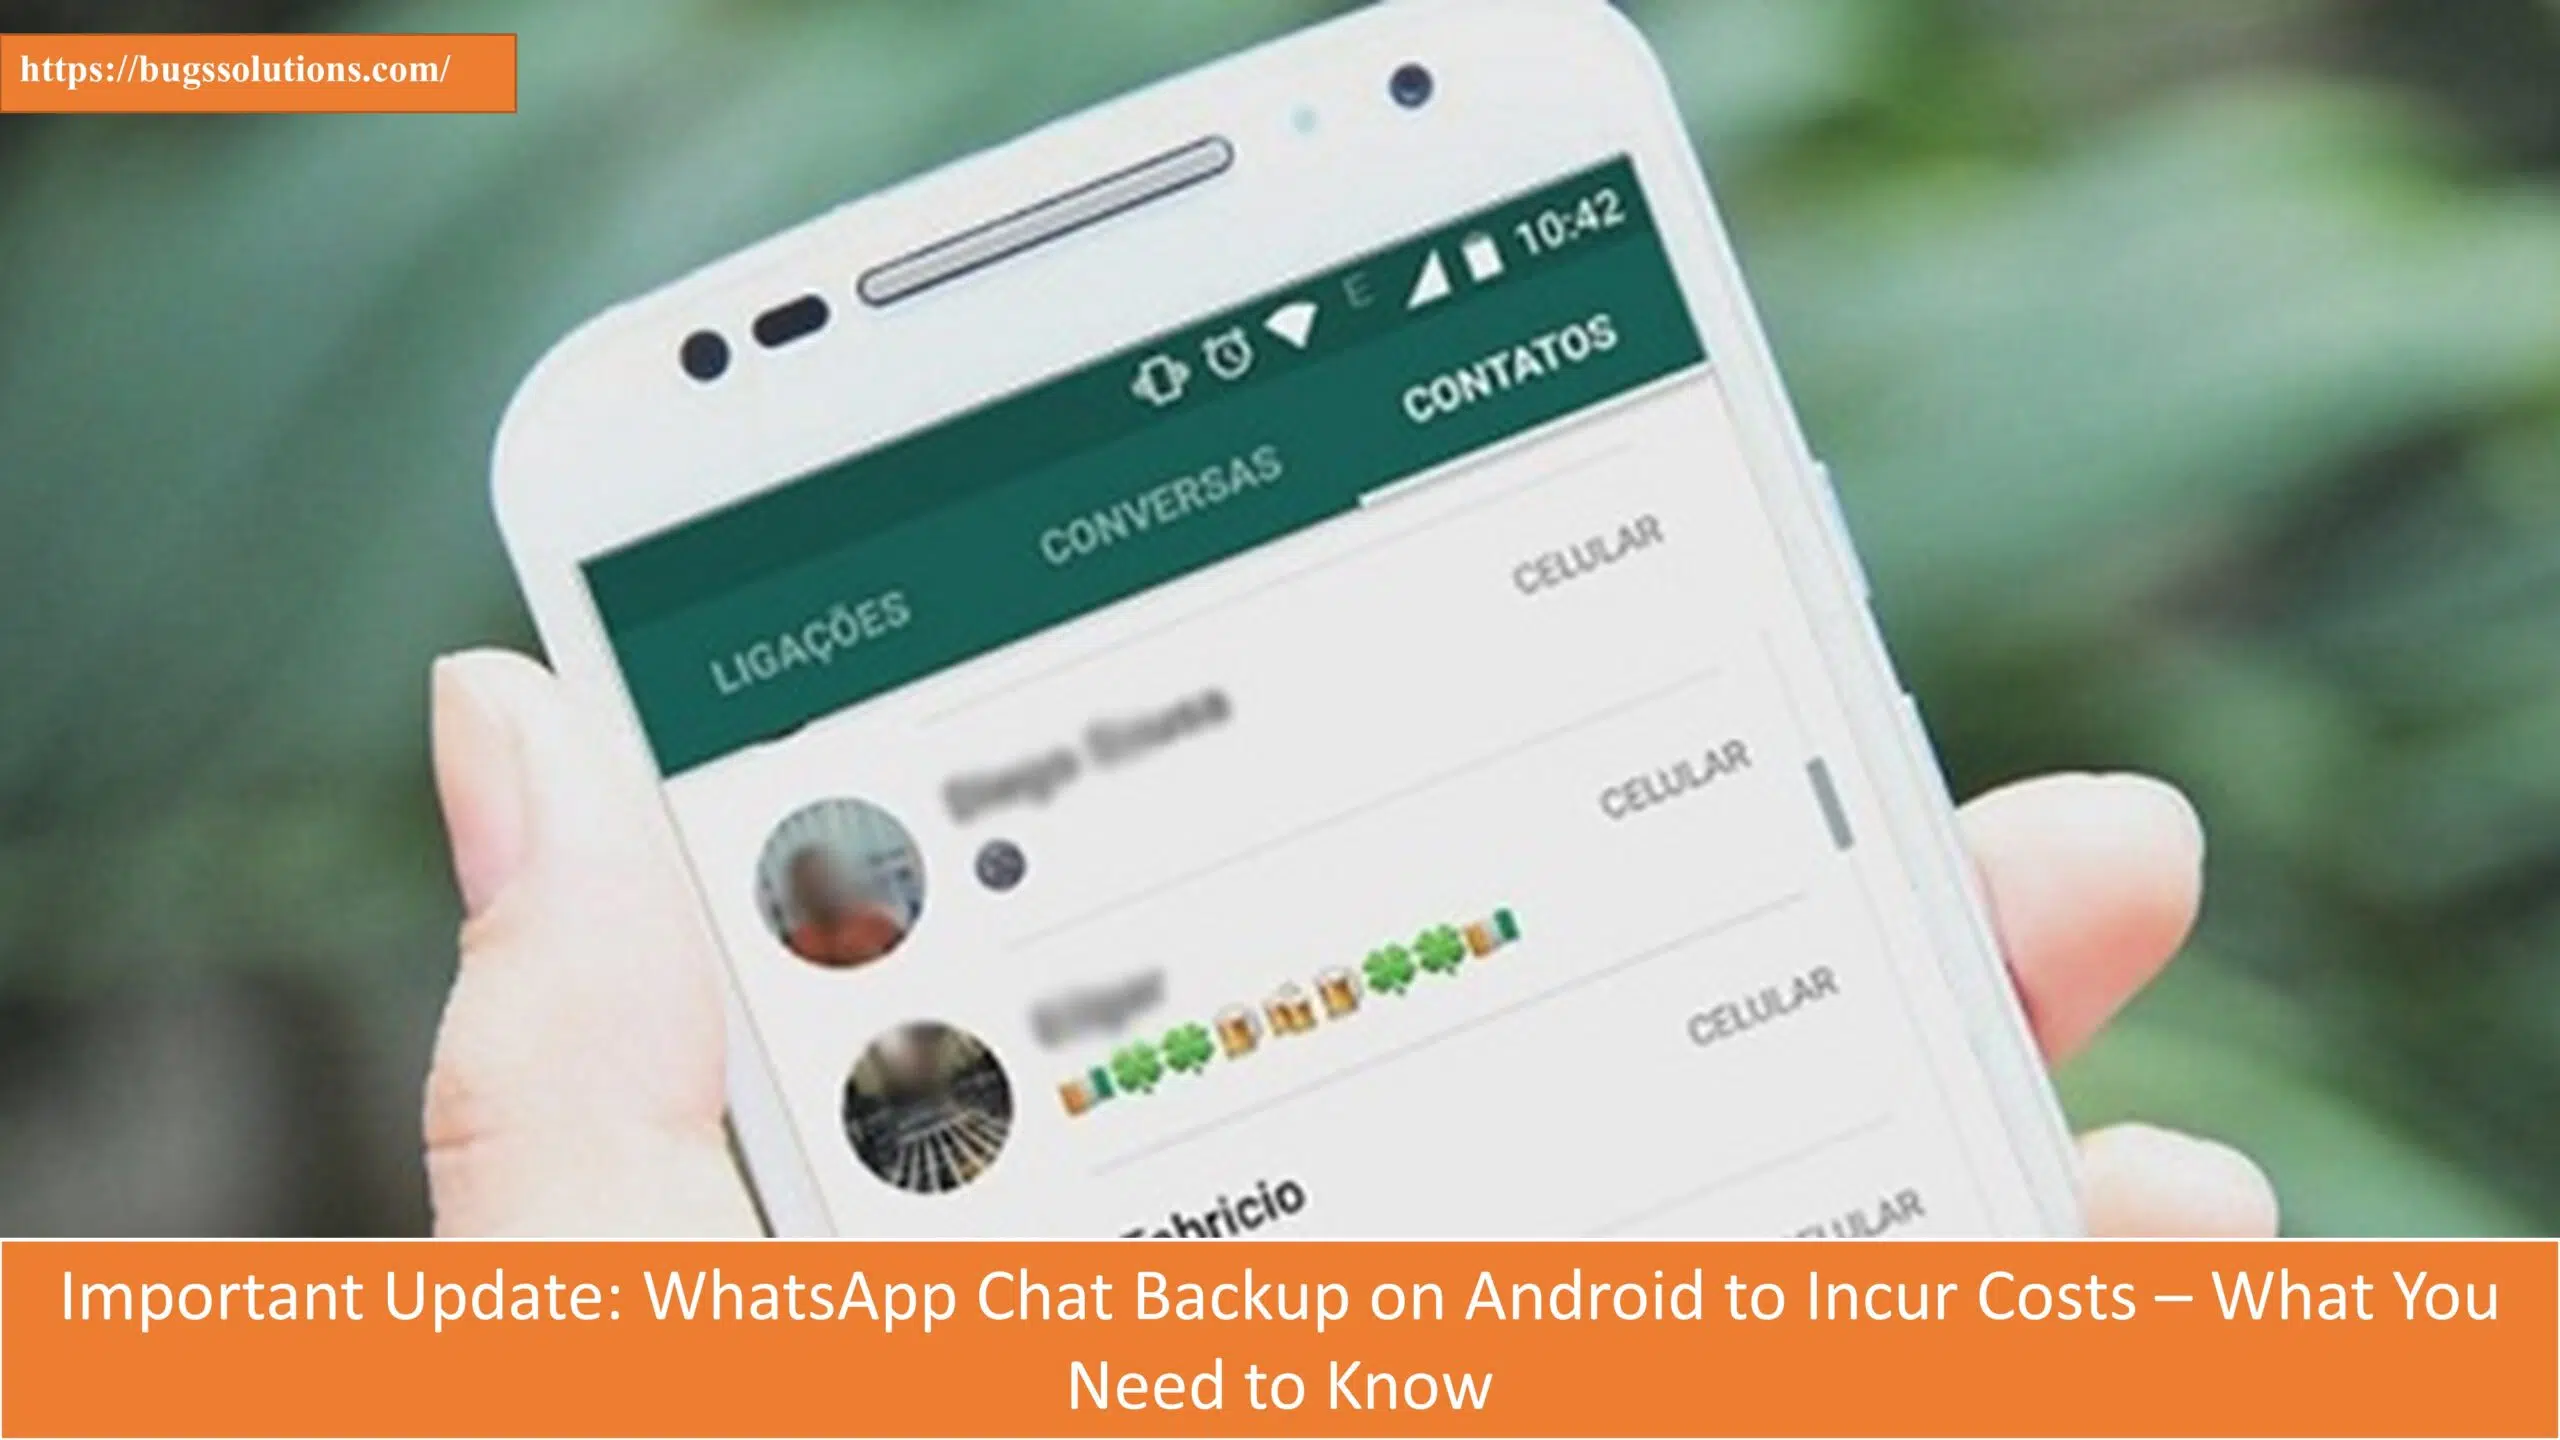 Important Update: WhatsApp Chat Backup on Android to Incur Costs – What You Need to Know